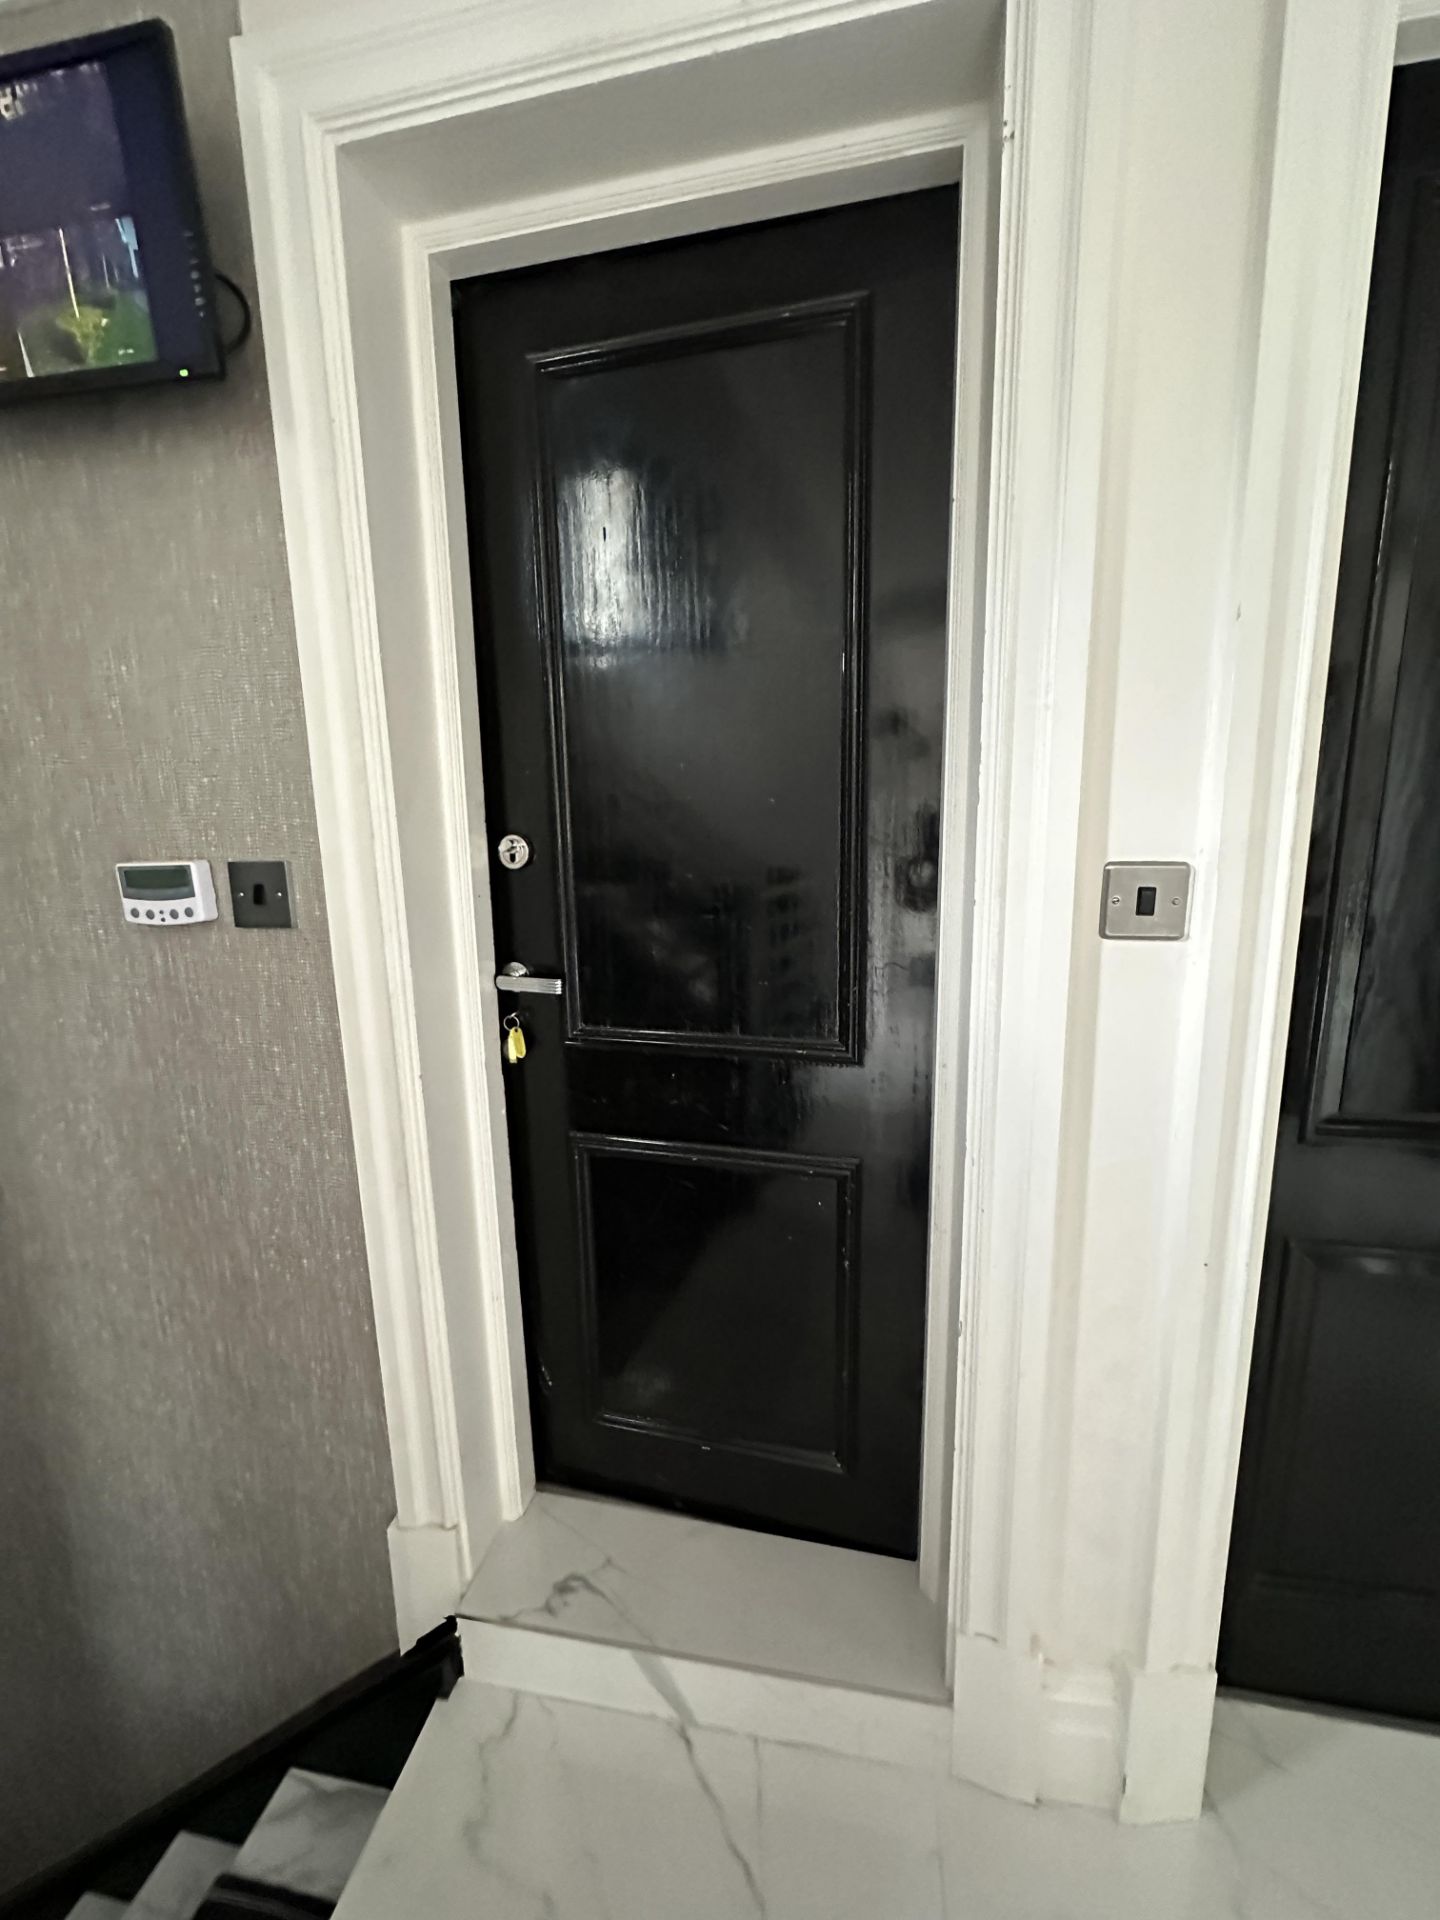 1 x SOLID OAK Black Gloss Fire Door And Stainless Steel Hardware - Ref: KKH114 - CL848 - NO VAT ON